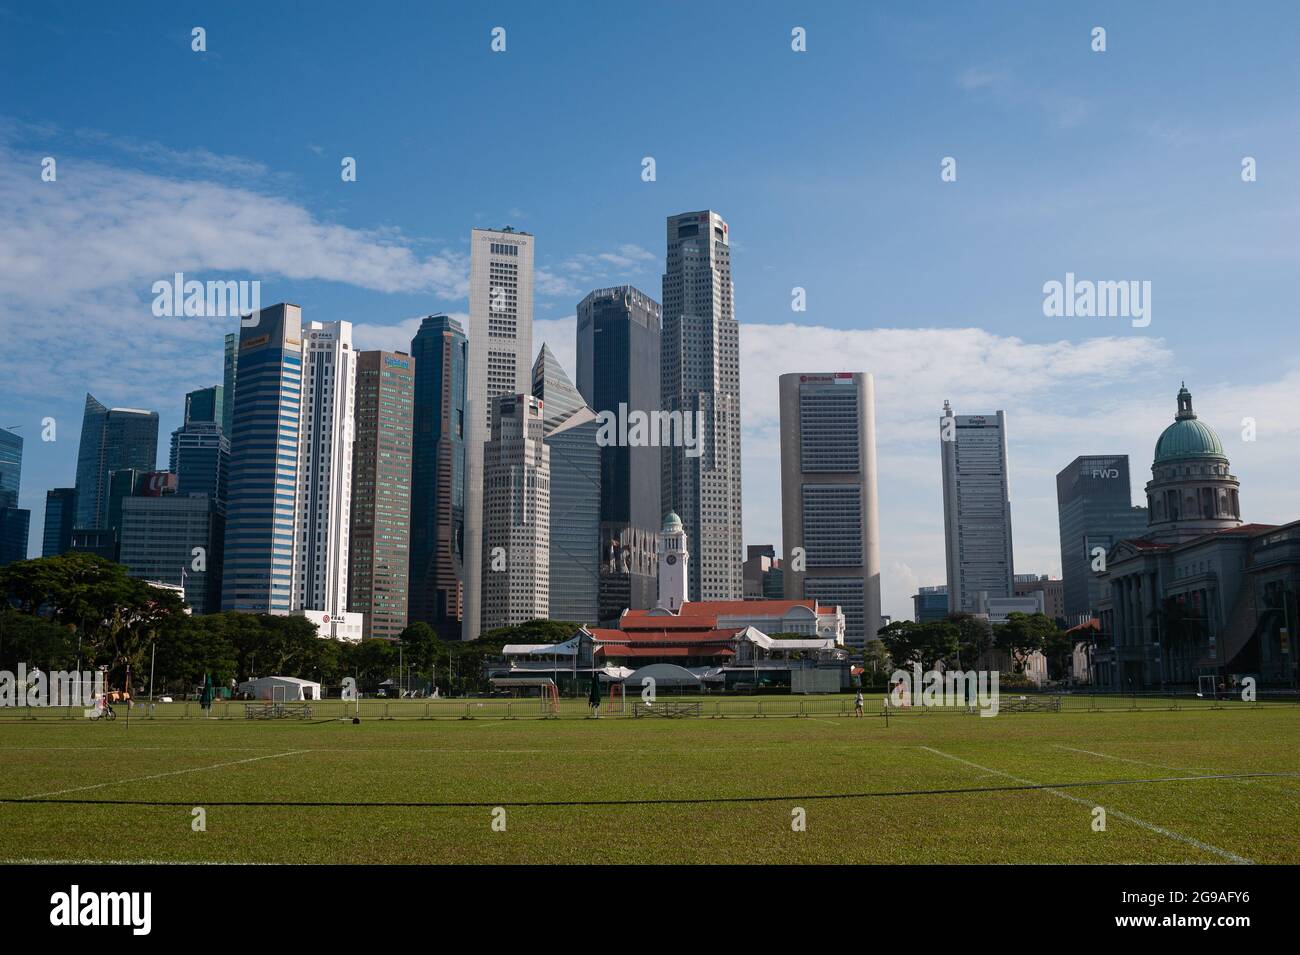 24.07.2021, Singapore, Republic of Singapore, Asia - Cityscape with skyline of the central business district and the skyscrapers around Raffles Place. Stock Photo